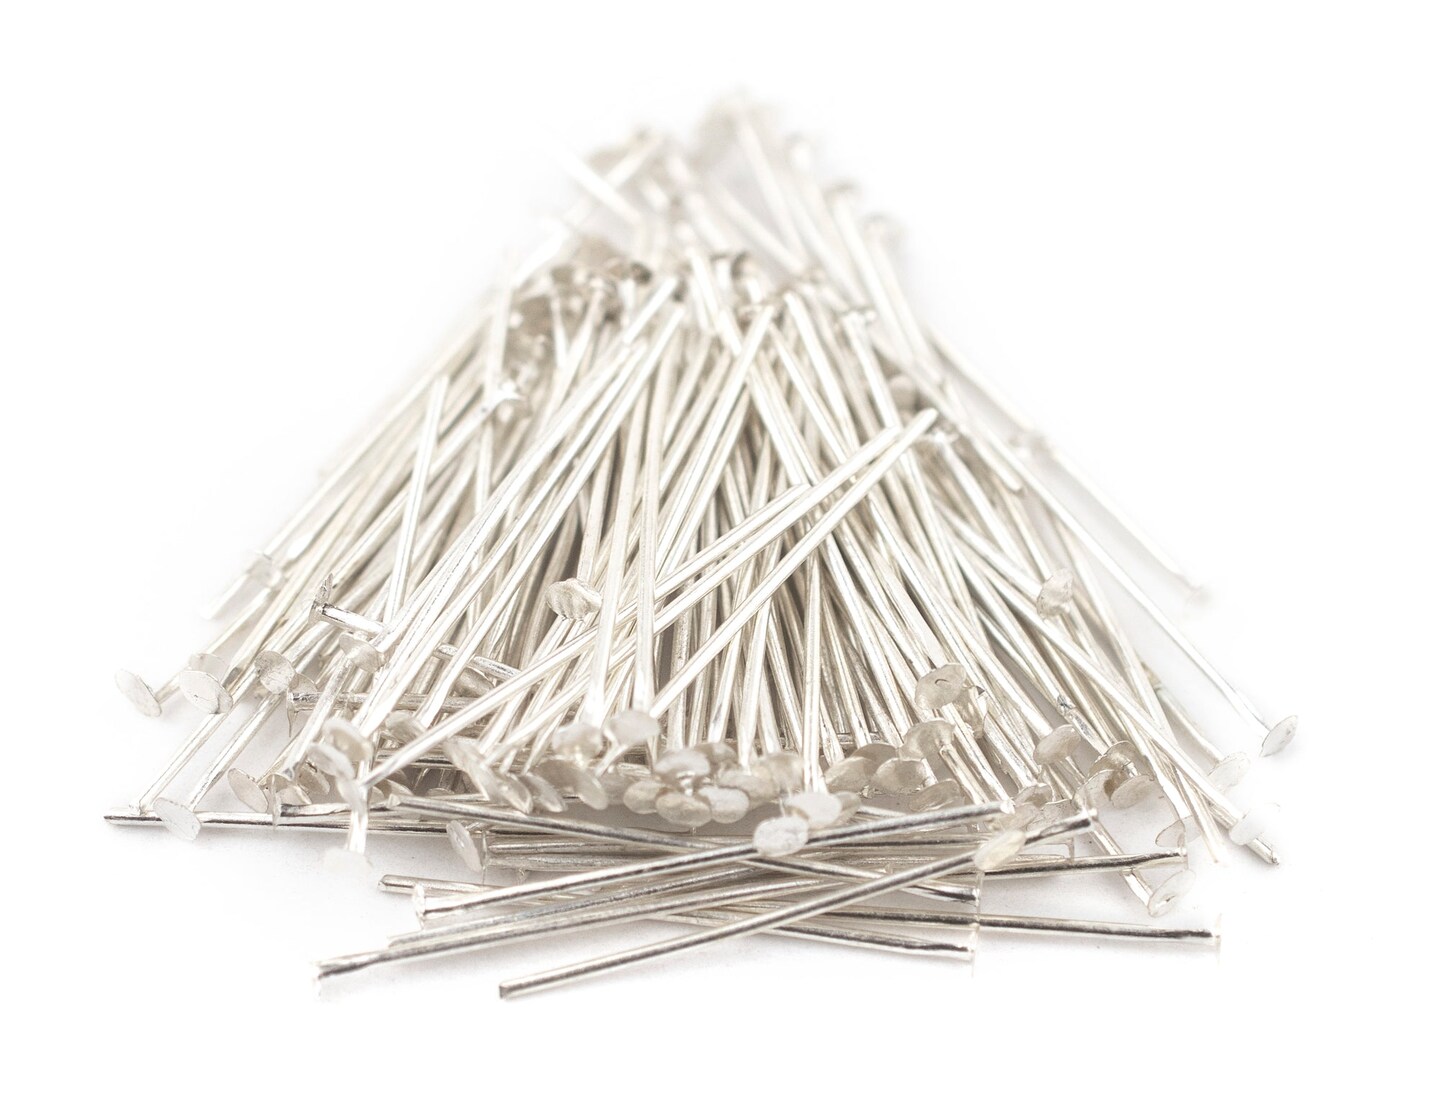 TheBeadChest Silver 21 Gauge 1 Inch Head Pins (Approx 100 pieces)